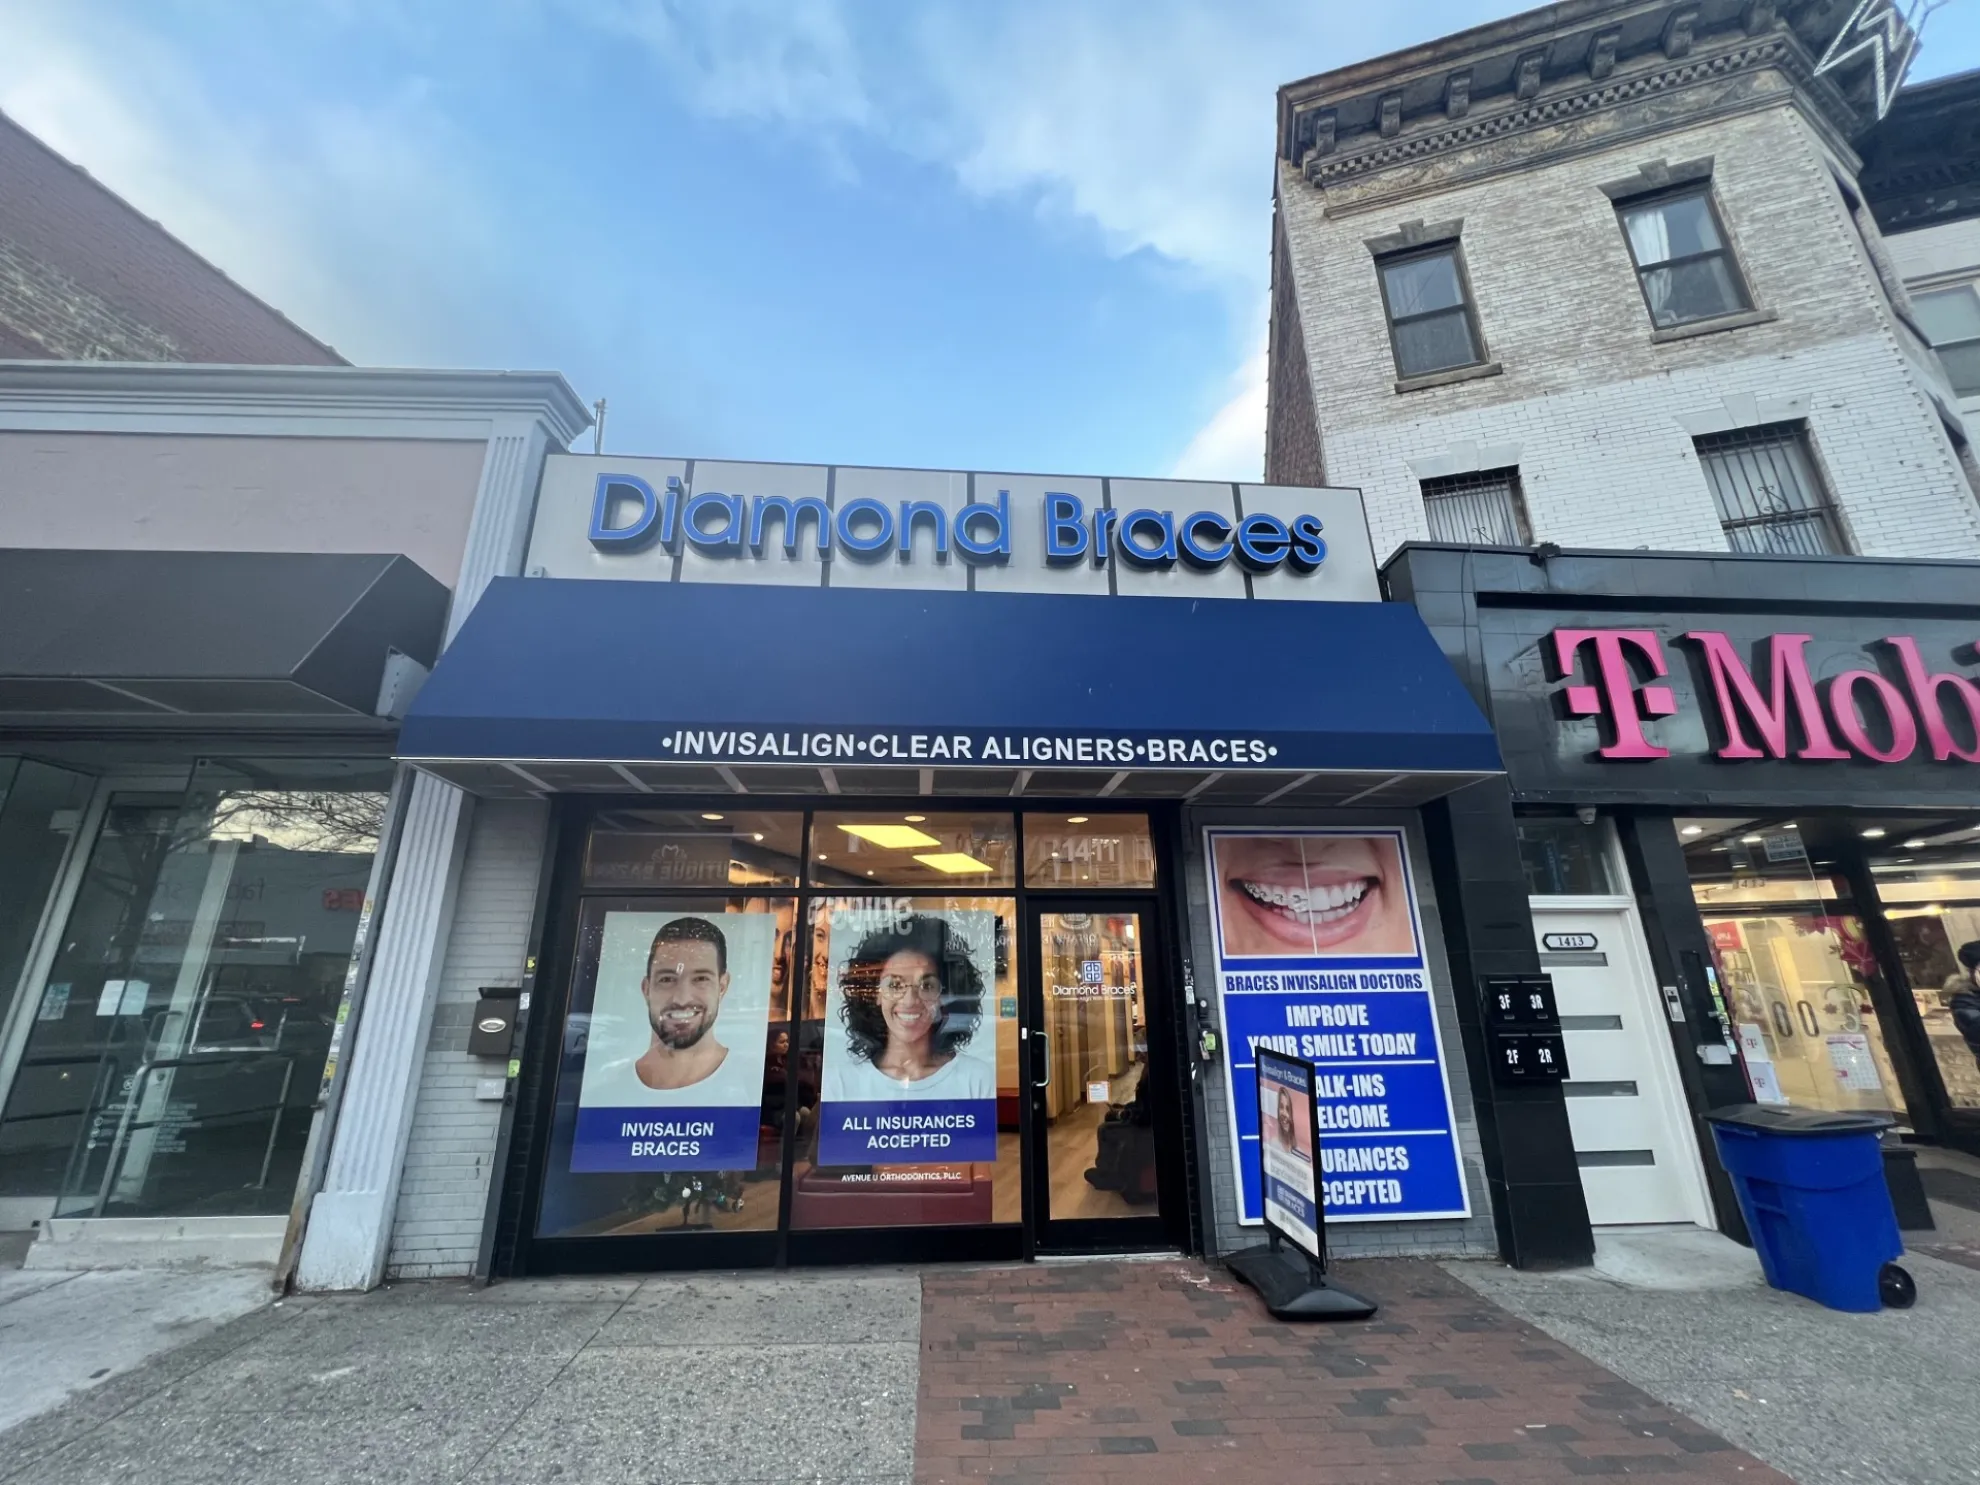 orthodontist working with patient in diamondbraces homecrest brooklyn ny office